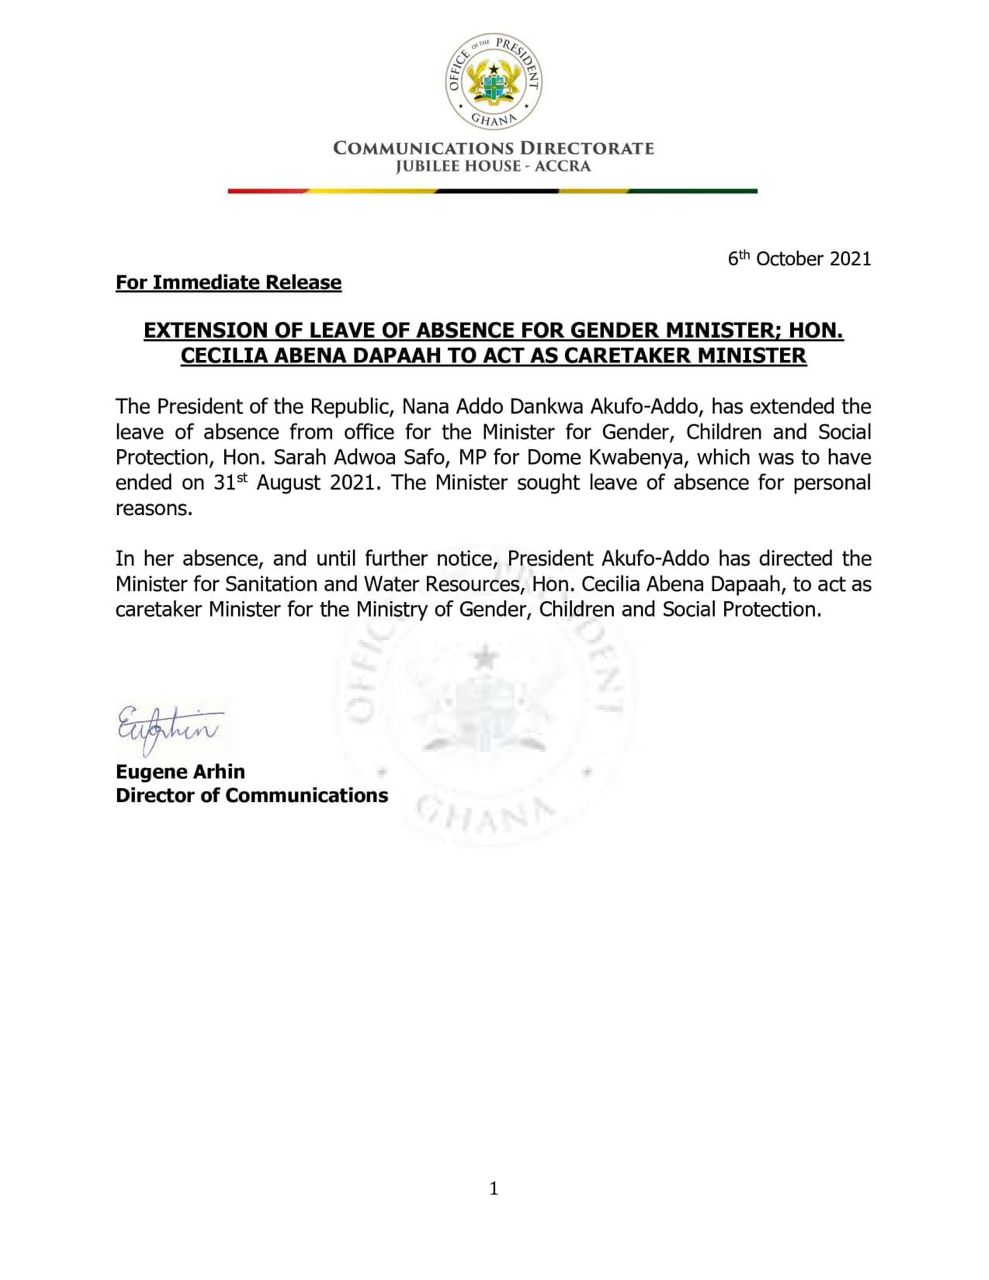 Cecilia Dapaah now caretaker Gender Minister as Adwoa Safo’s leave of absence is extended